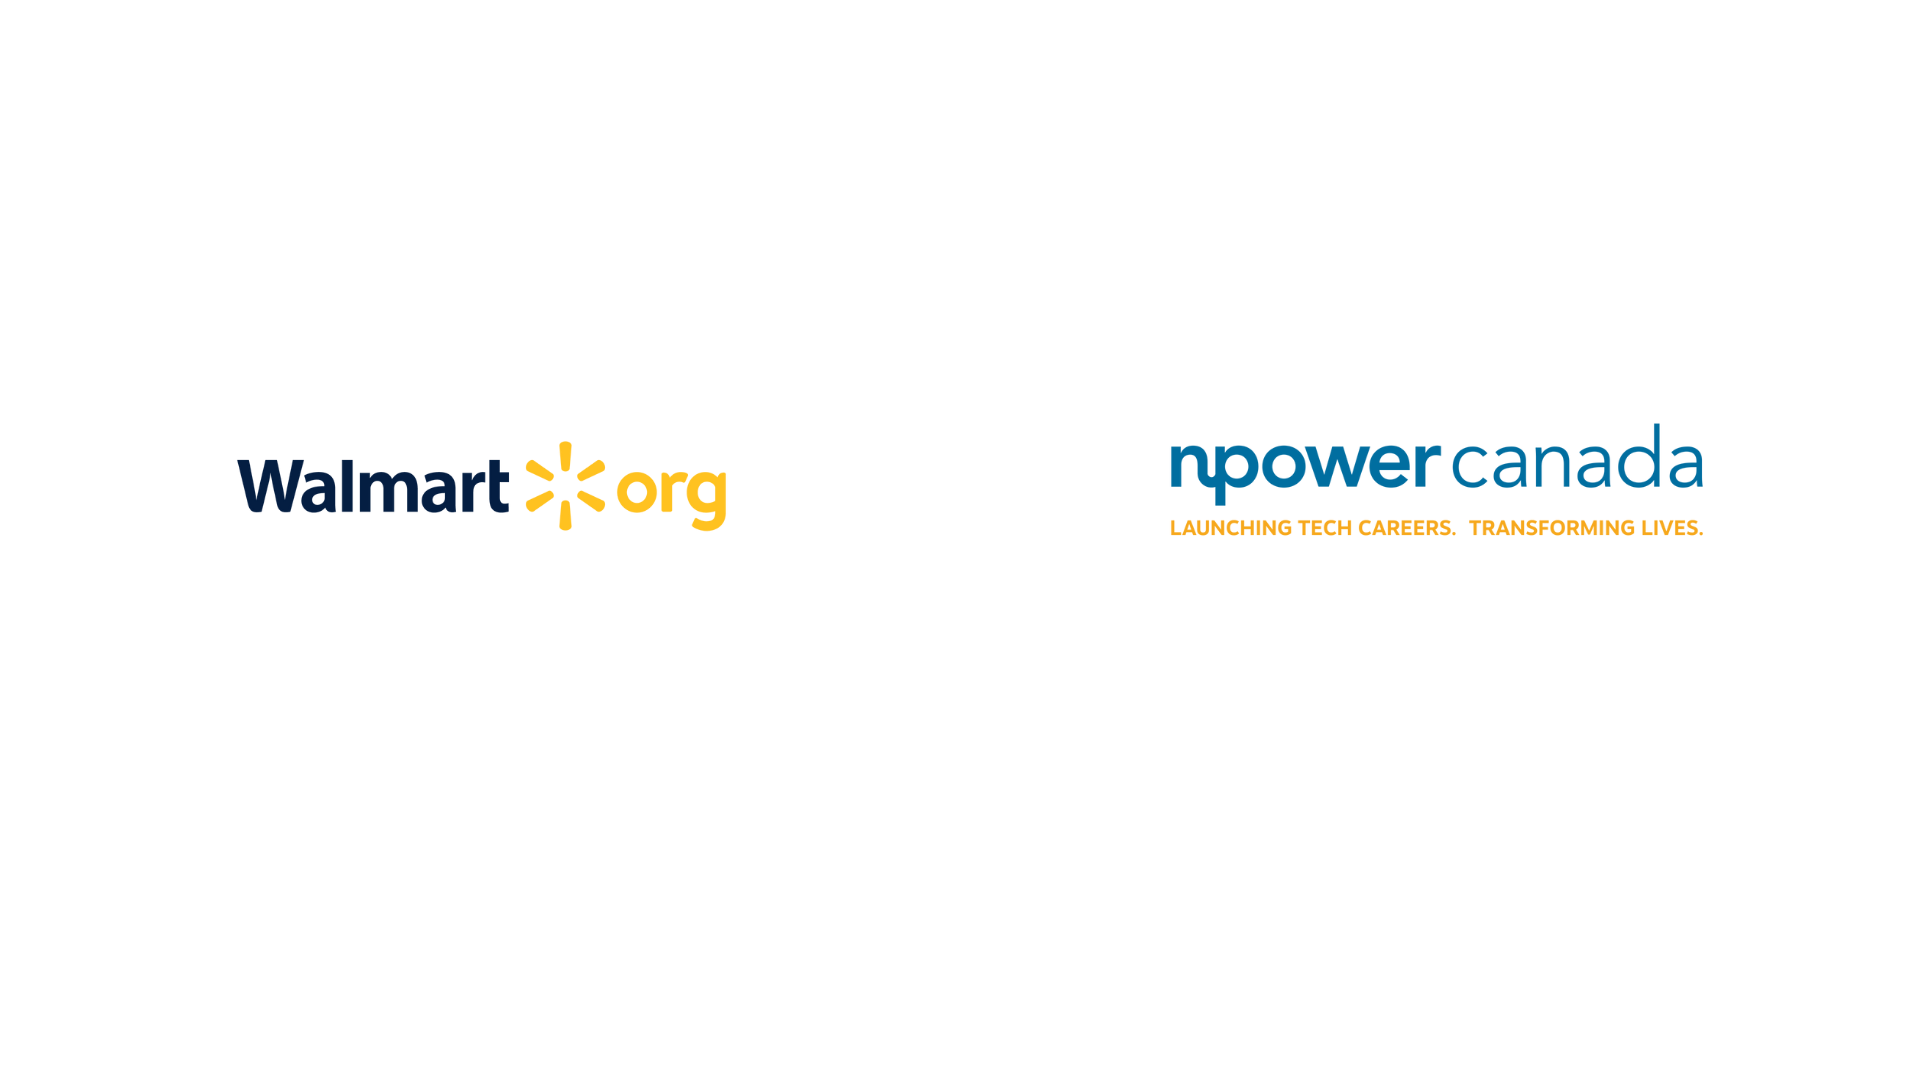 Walmart Foundation logo in blue and yellow font text, and NPower Canada logo in blue font text with English tagline in orange font text